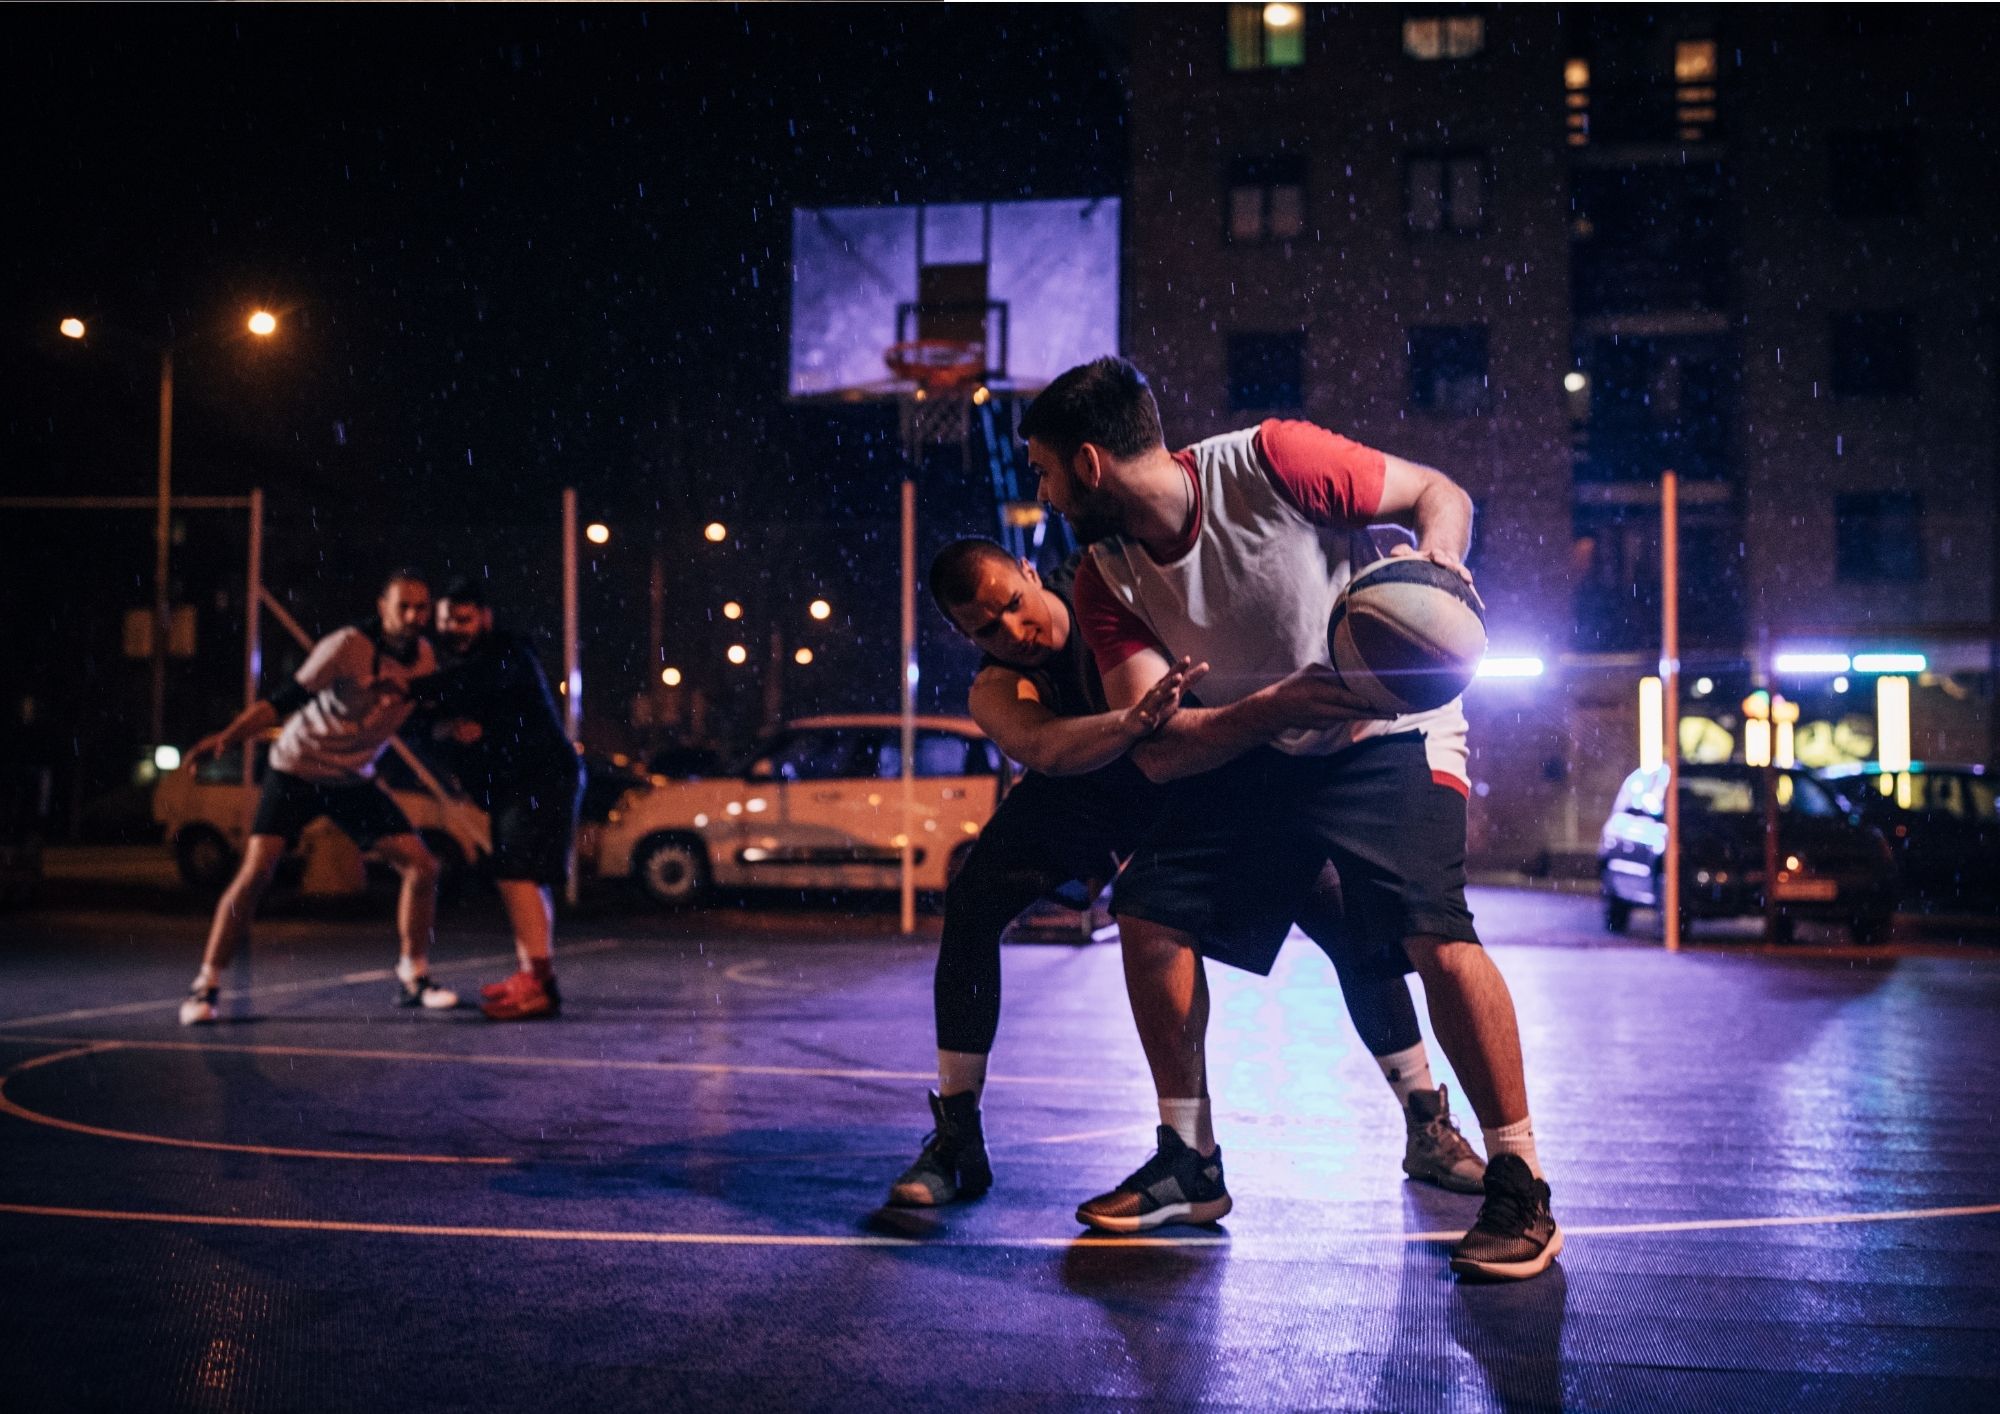 Playing a game of basketball at night